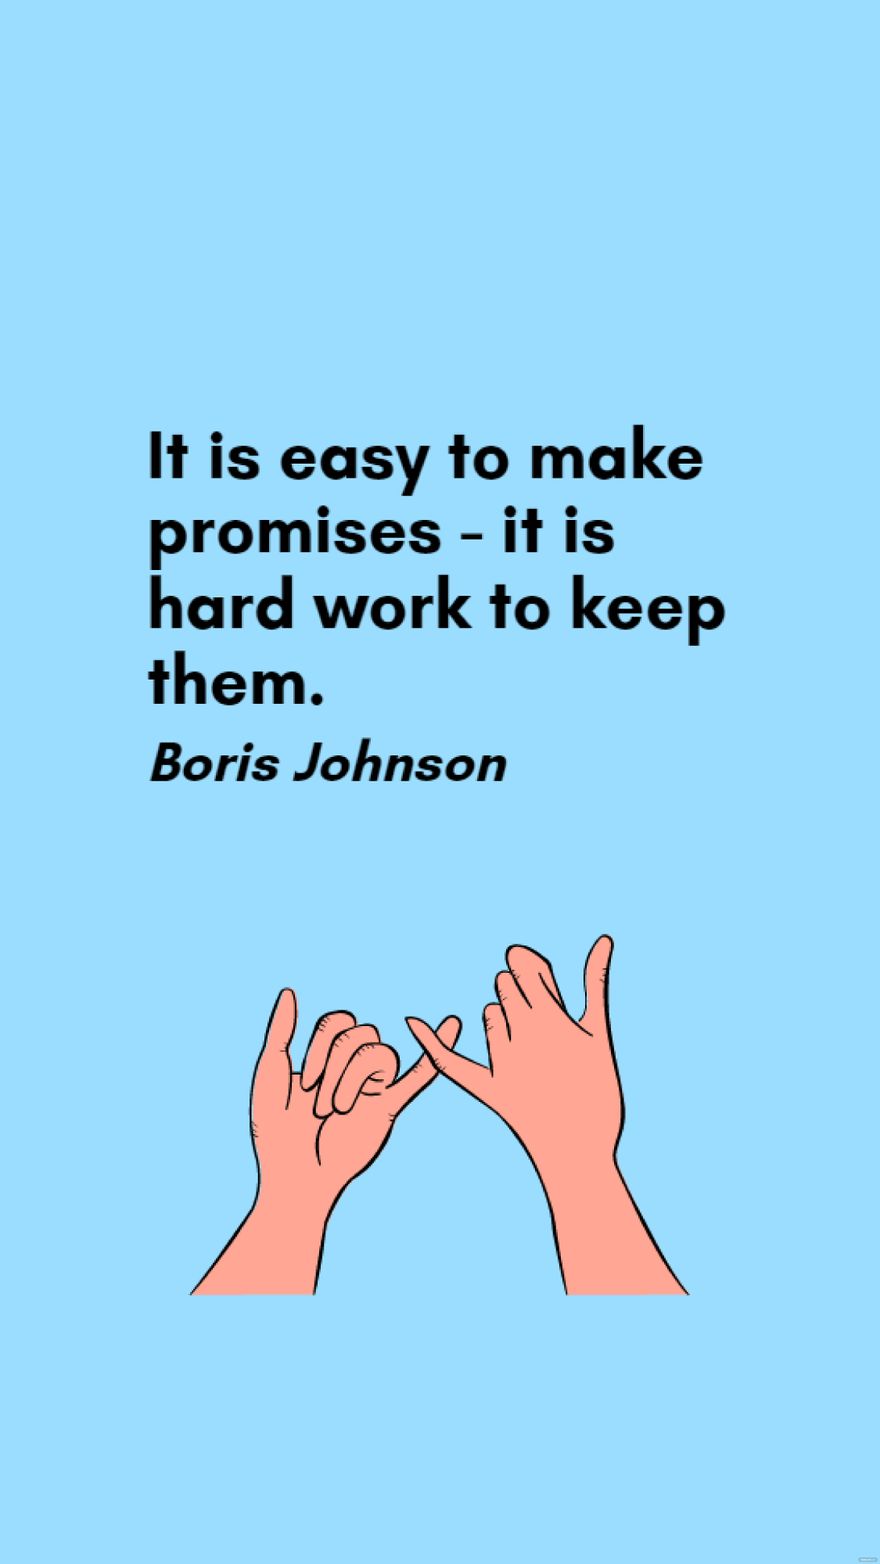 Free Boris Johnson - It is easy to make promises - it is hard work to keep them. in JPG